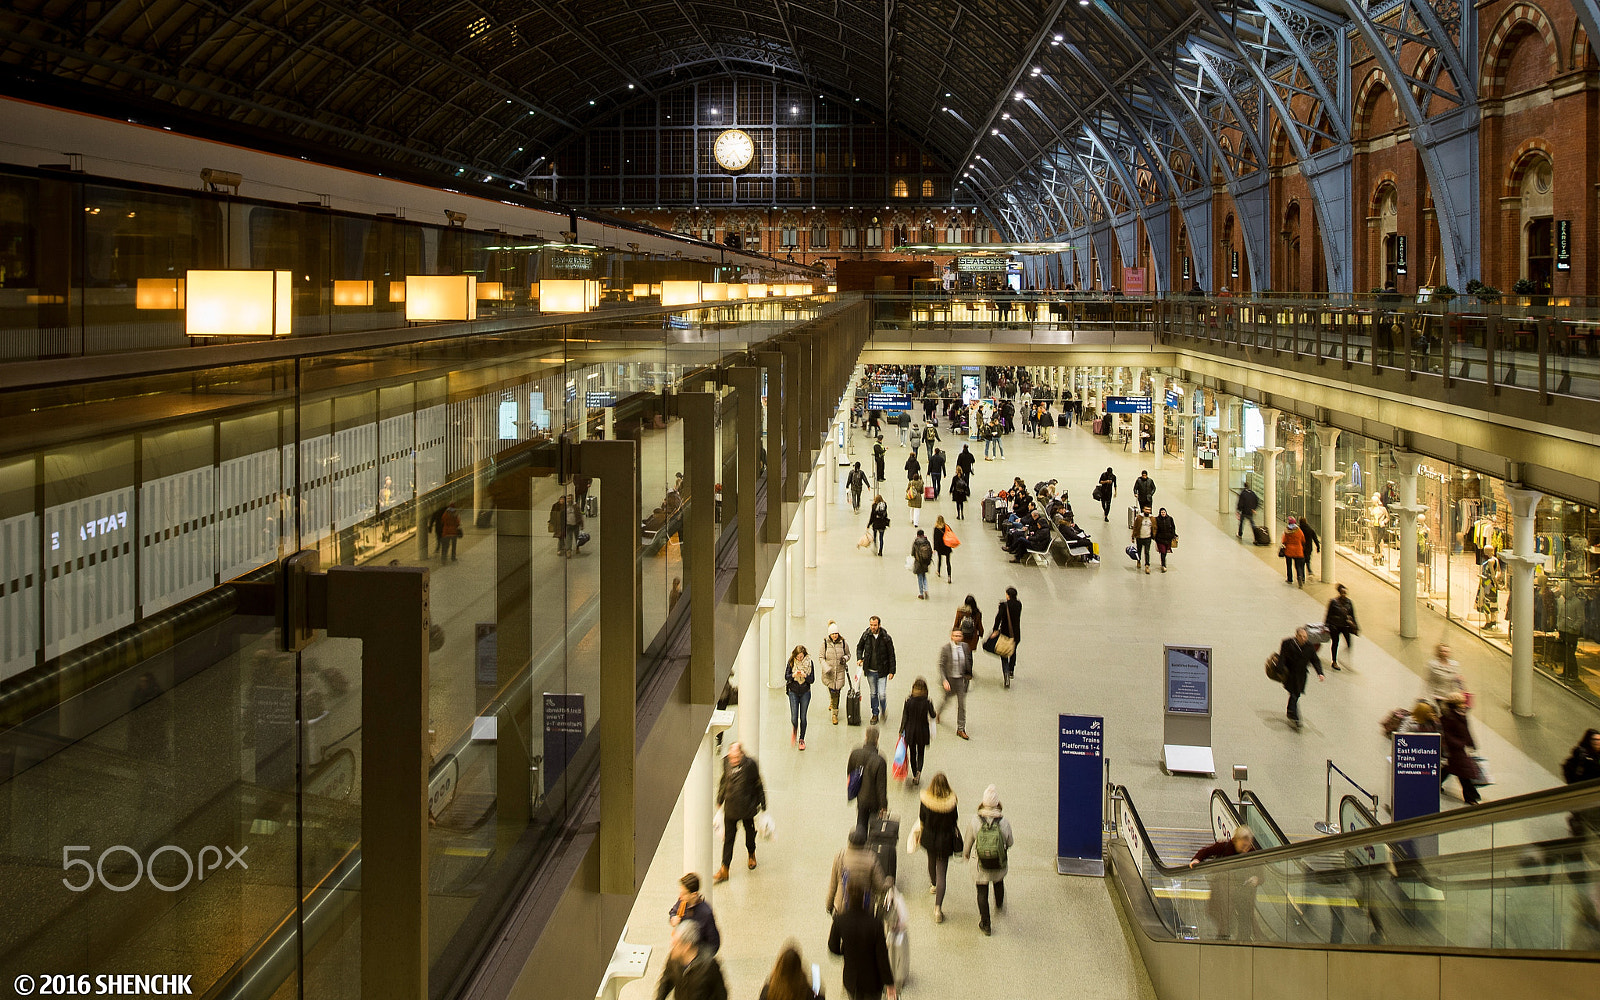 Sony a7 II sample photo. St. pancras railway station in london photography